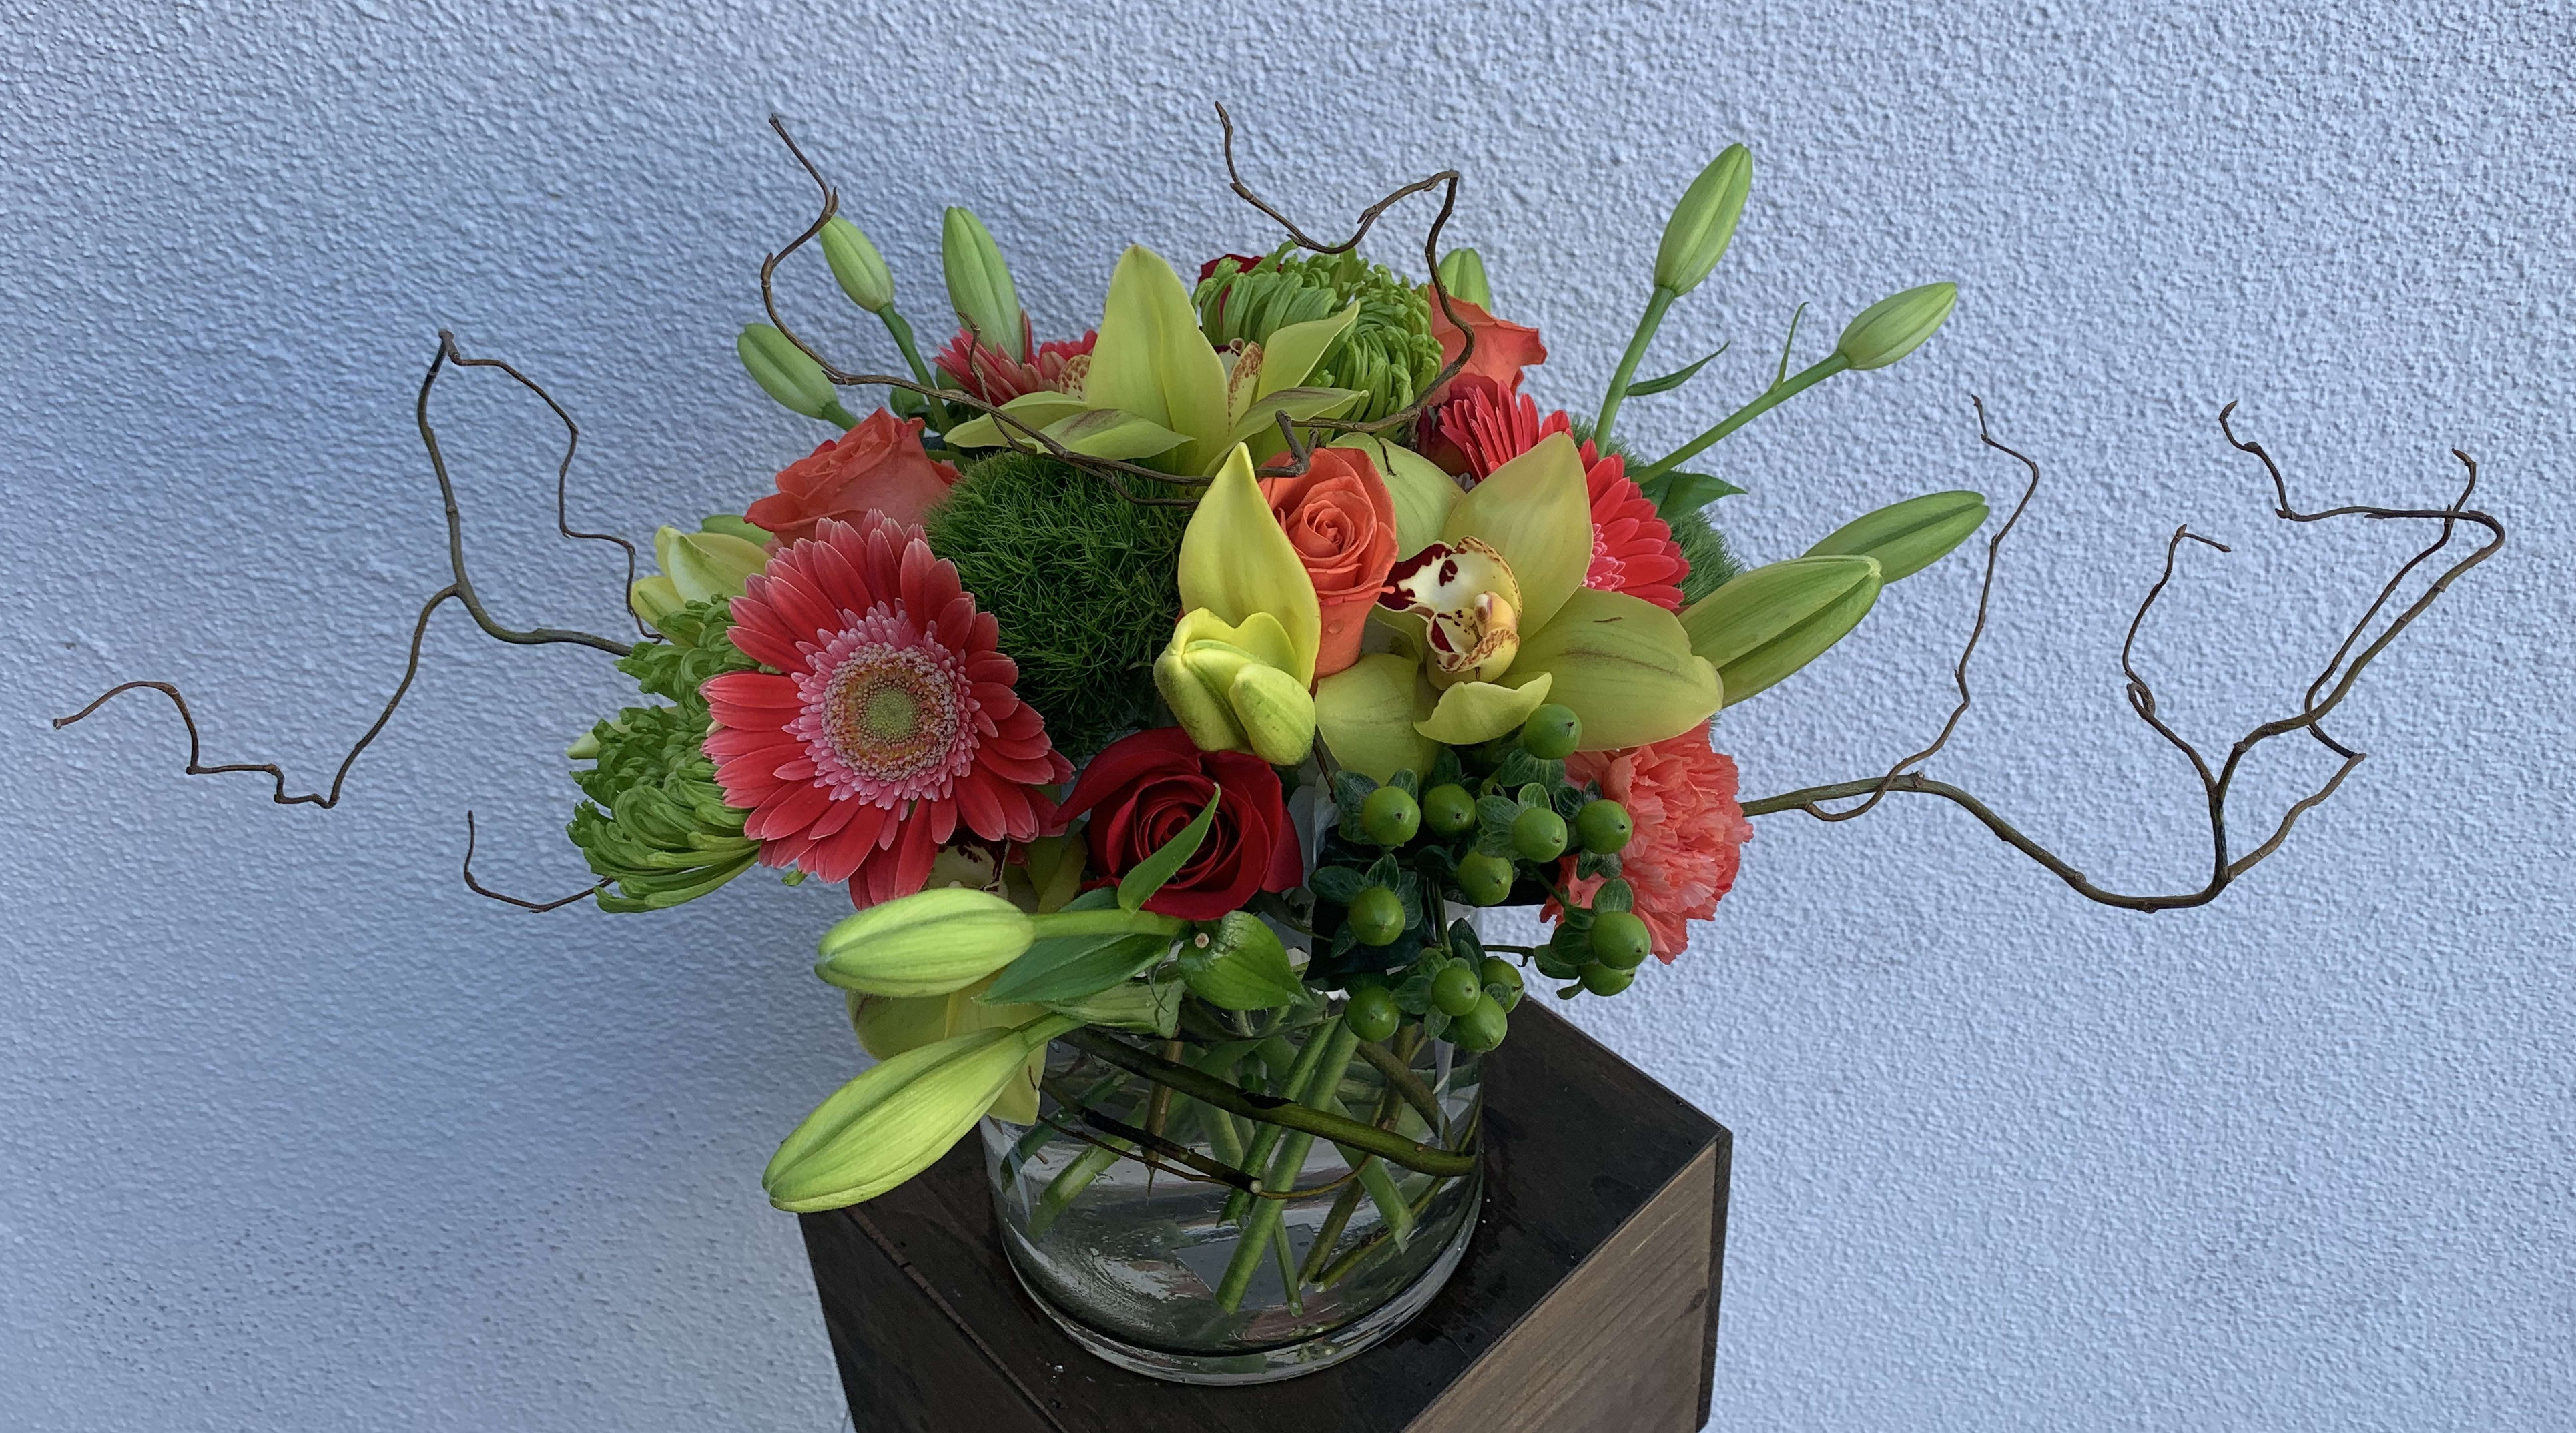 Summer Breeze - A refreshing arrangement of green cymbidium orchids, green spider mums, orange gerbera daisies, orange and red roses, and yellow lilies. 